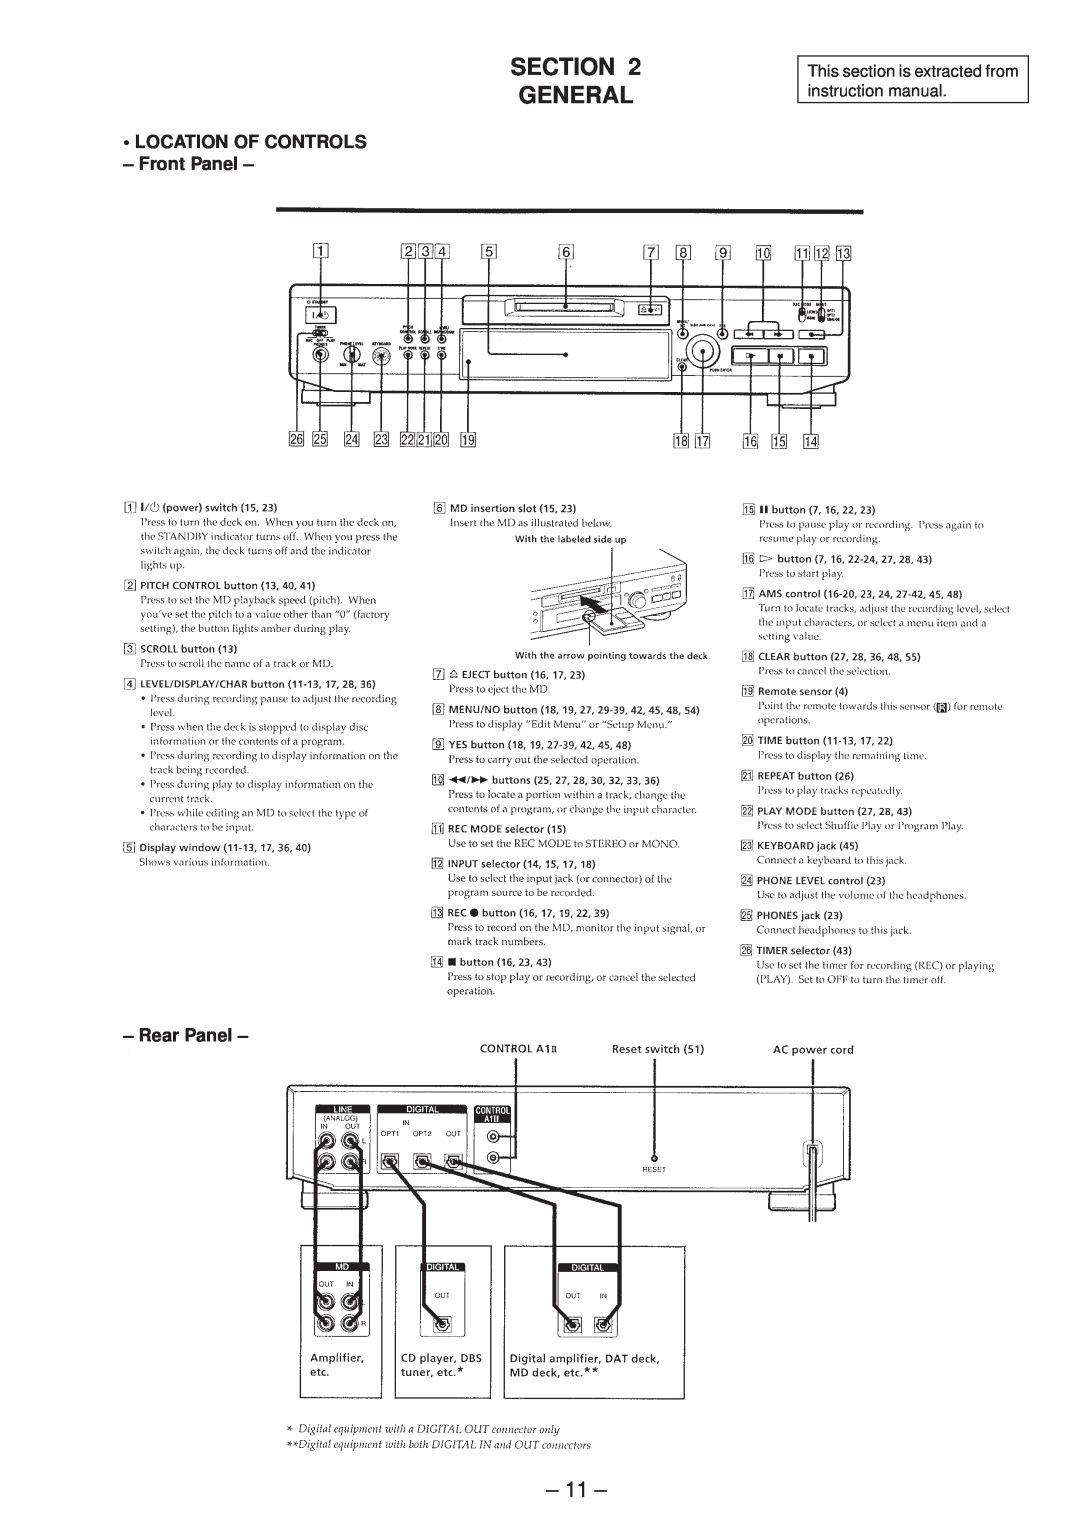 Sony MDS-JE630 service manual Section General, LOCATION OF CONTROLS - Front Panel, Rear Panel 